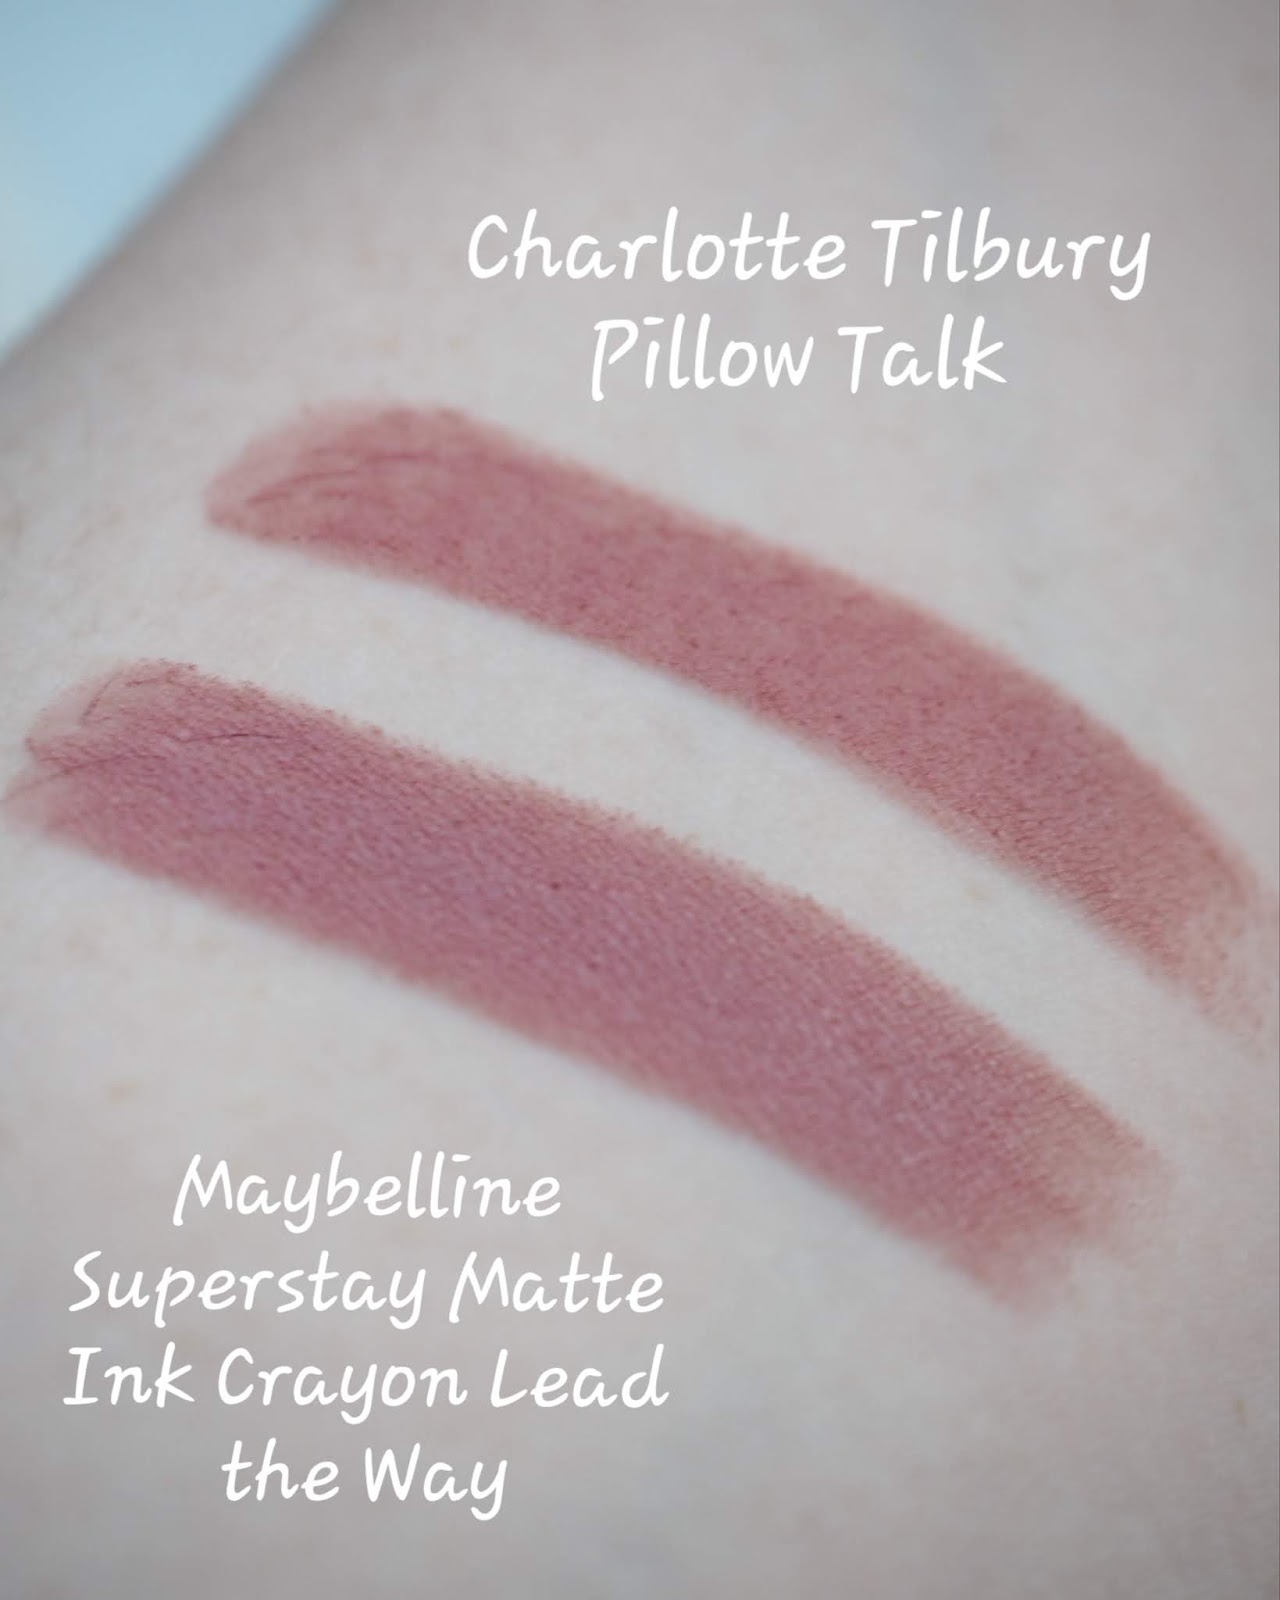 Charlotte Tilbury Pillow Talk Dupe Charlotte Tilbury Pillow Talk Lipstick Review and Dupe - Beauty and Bentley